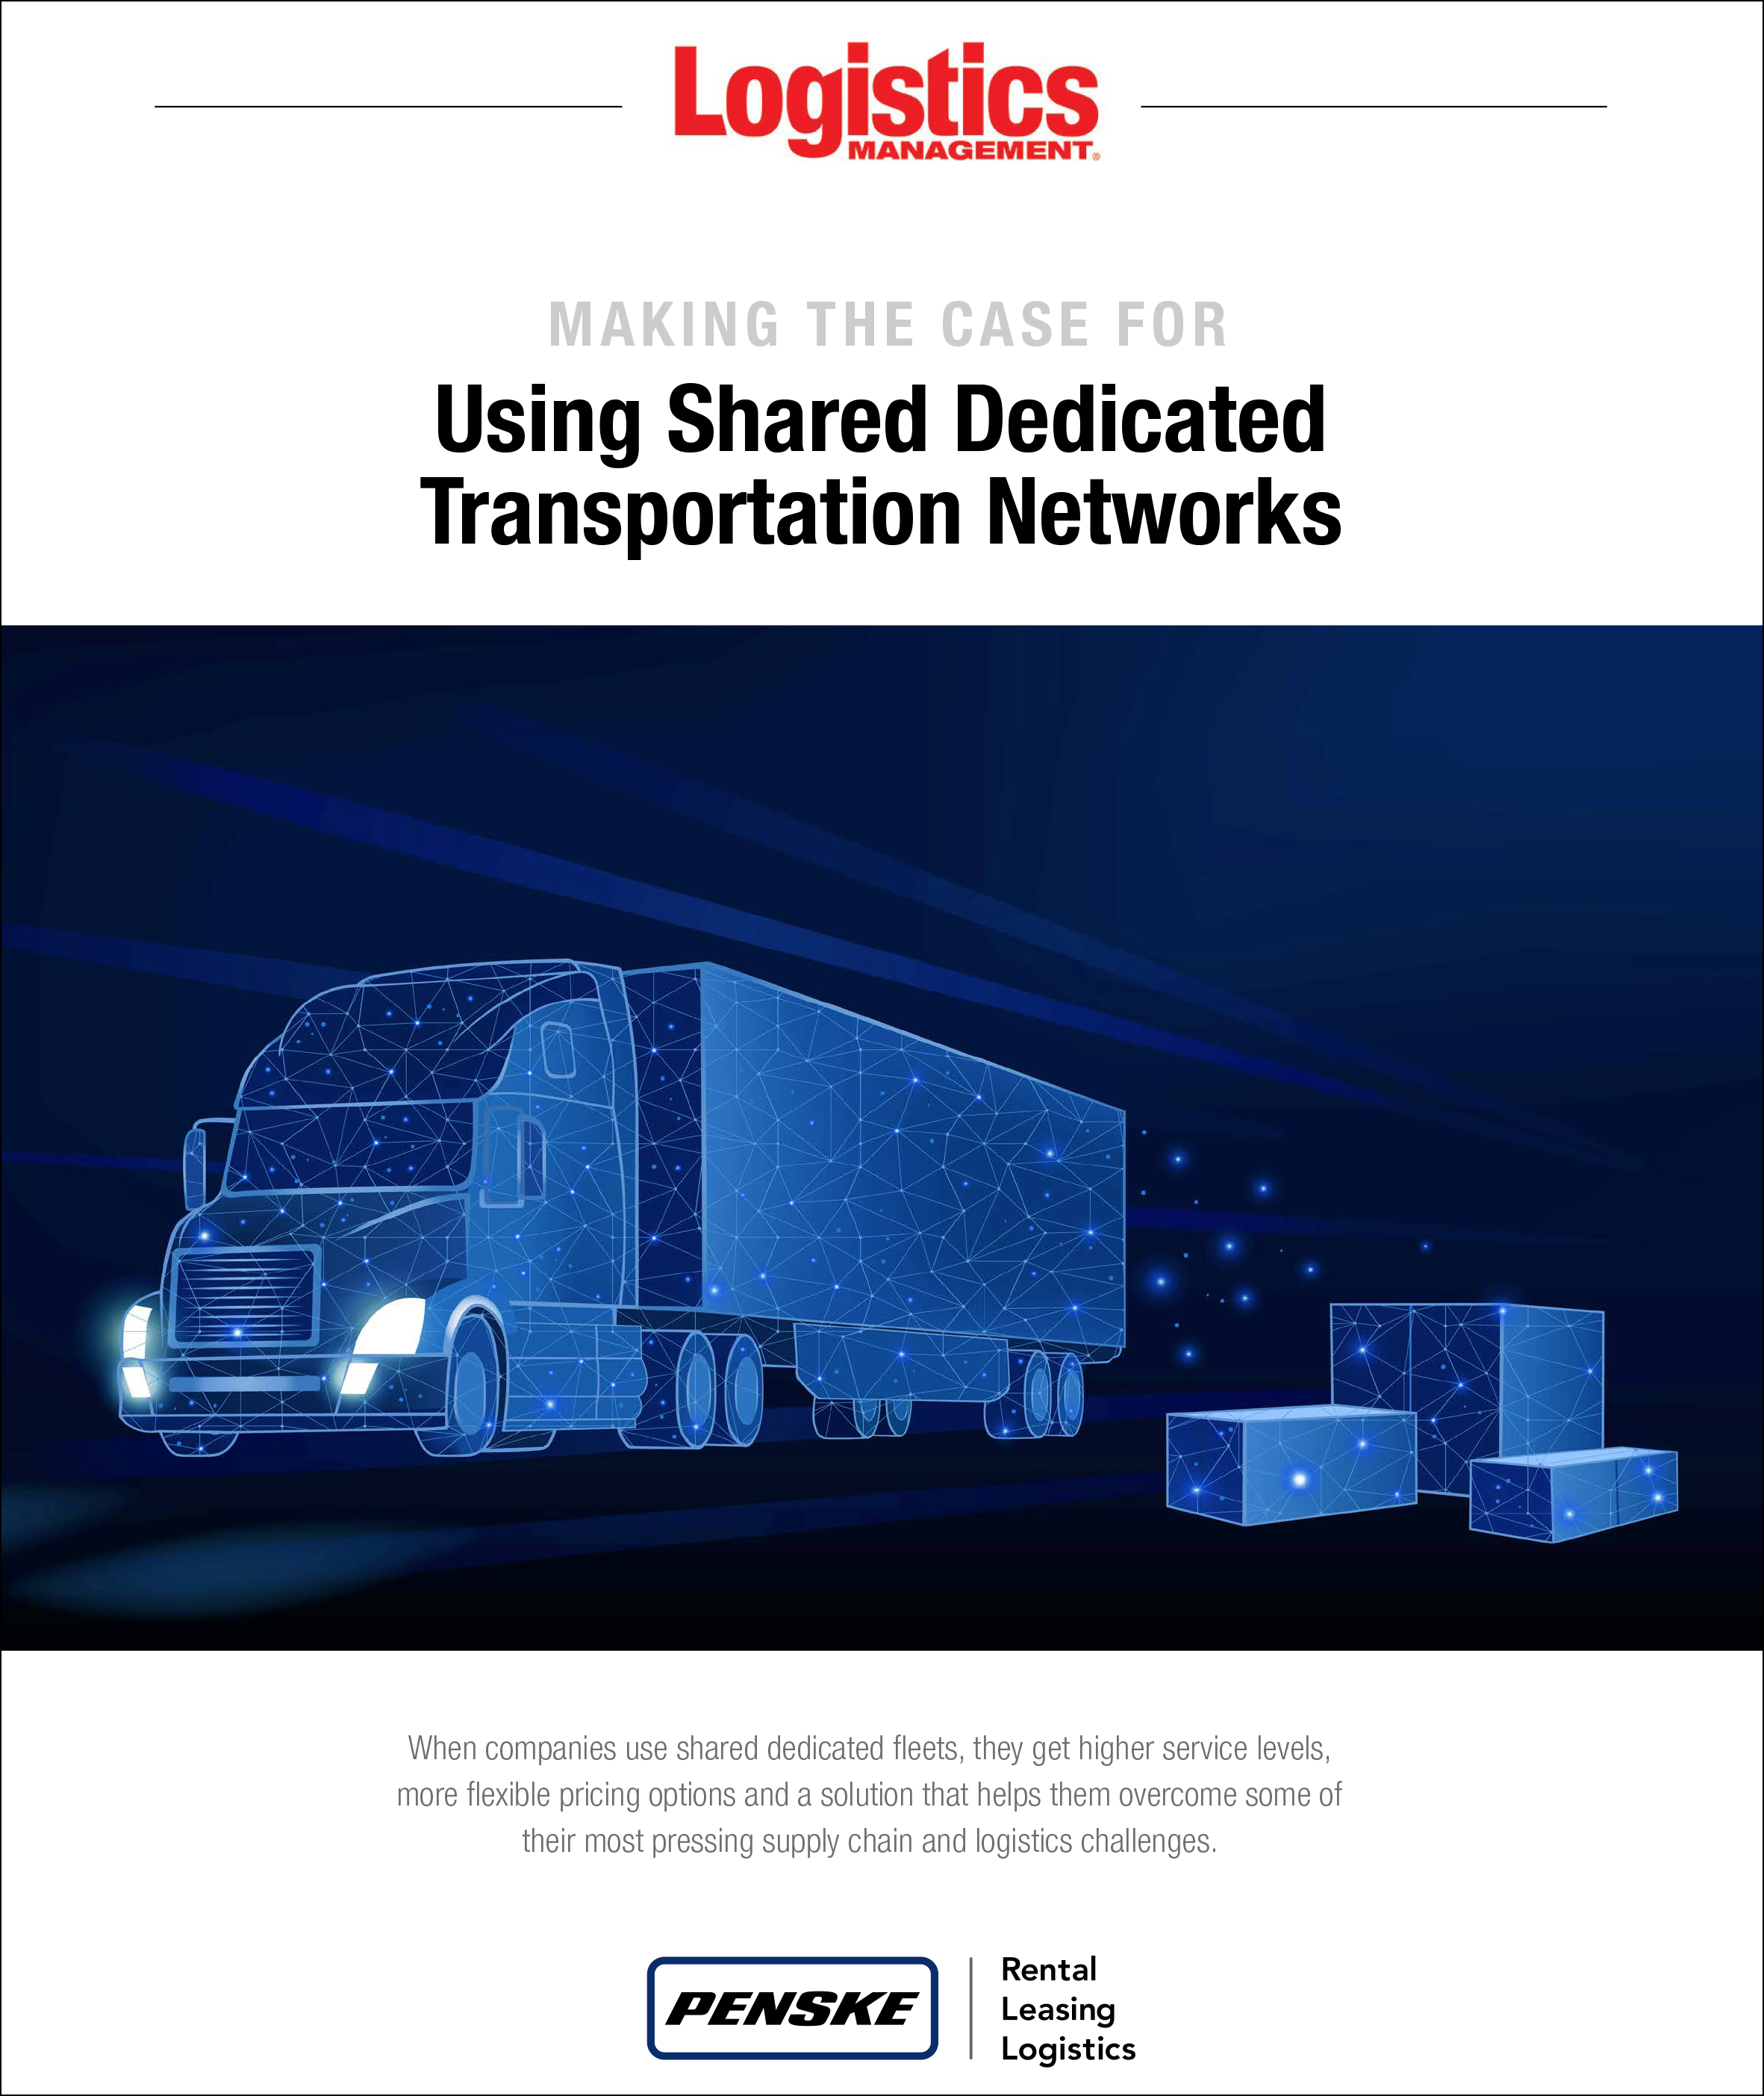 
E-Book: Making the Case for Using Shared Dedicated Transportation Networks
